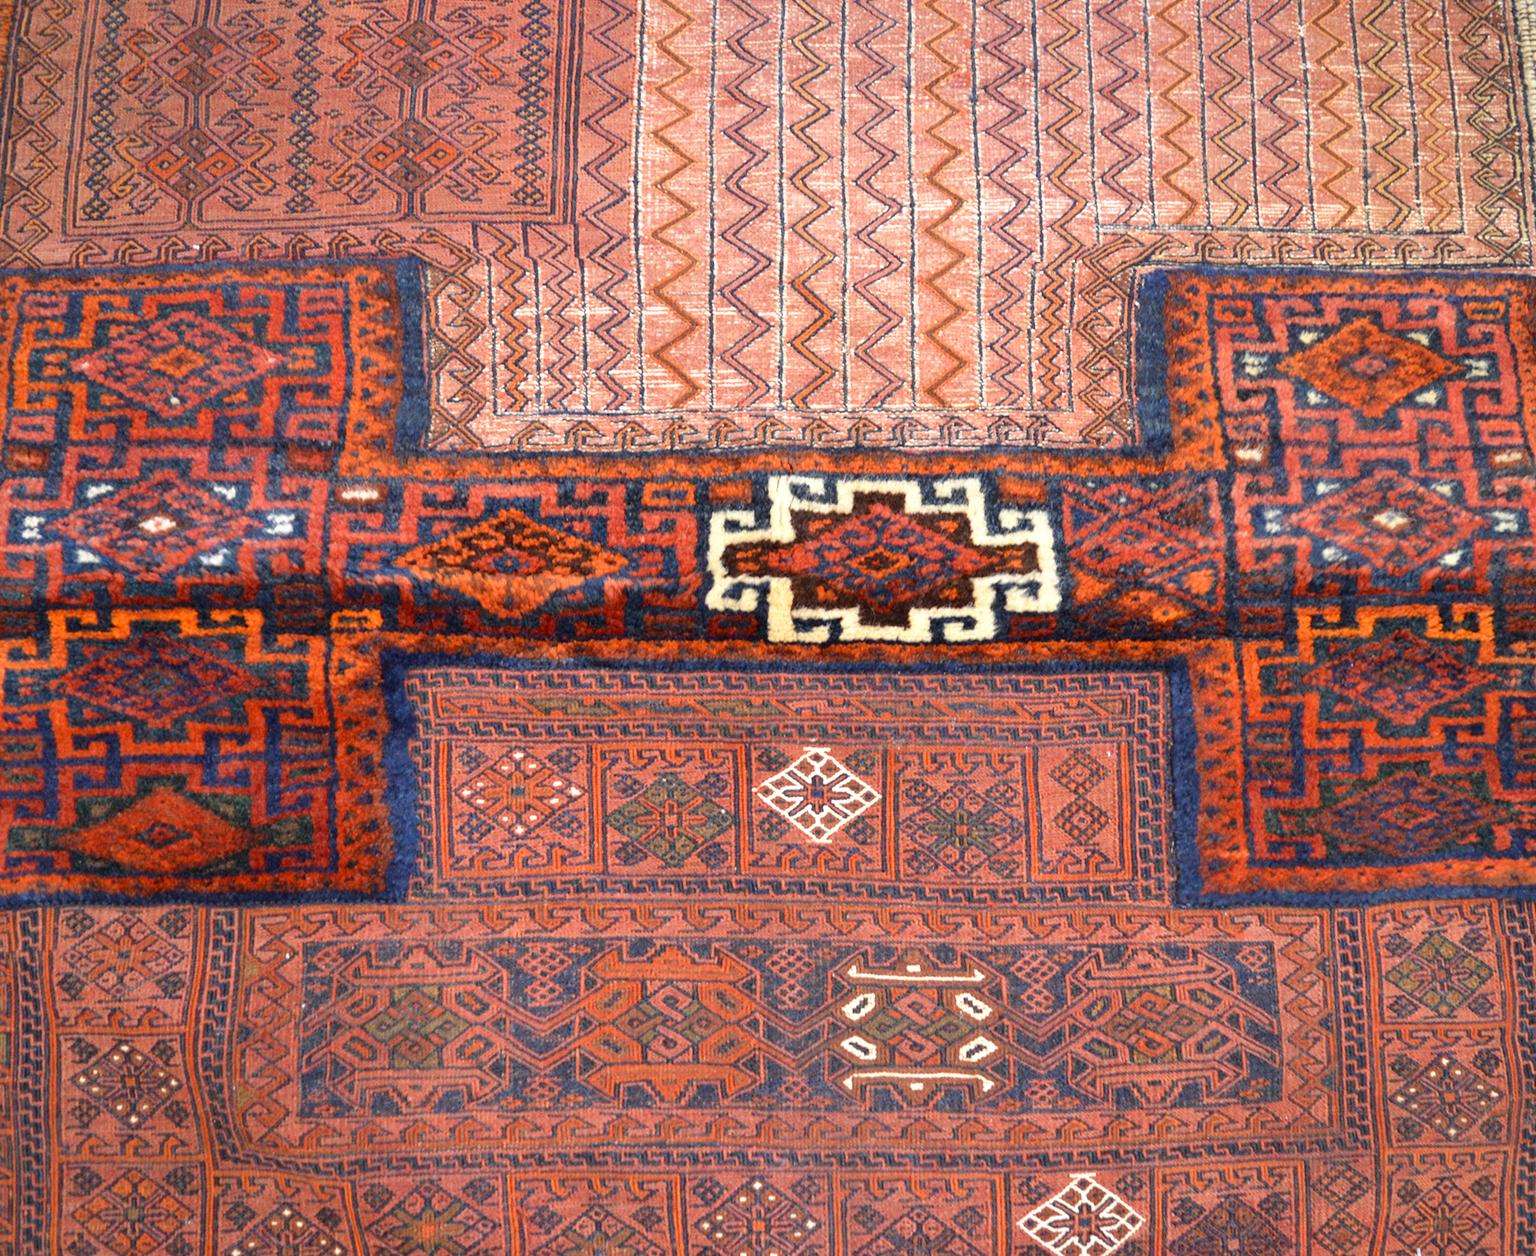 This antique saddlebag with Soumak and Bakhtiari Persian carpet weaves circa 1890 exhibits a colorful display of classic tribal geometric designs. The deep reds and blues contrast with cream outlines to create a unique interpretation of the